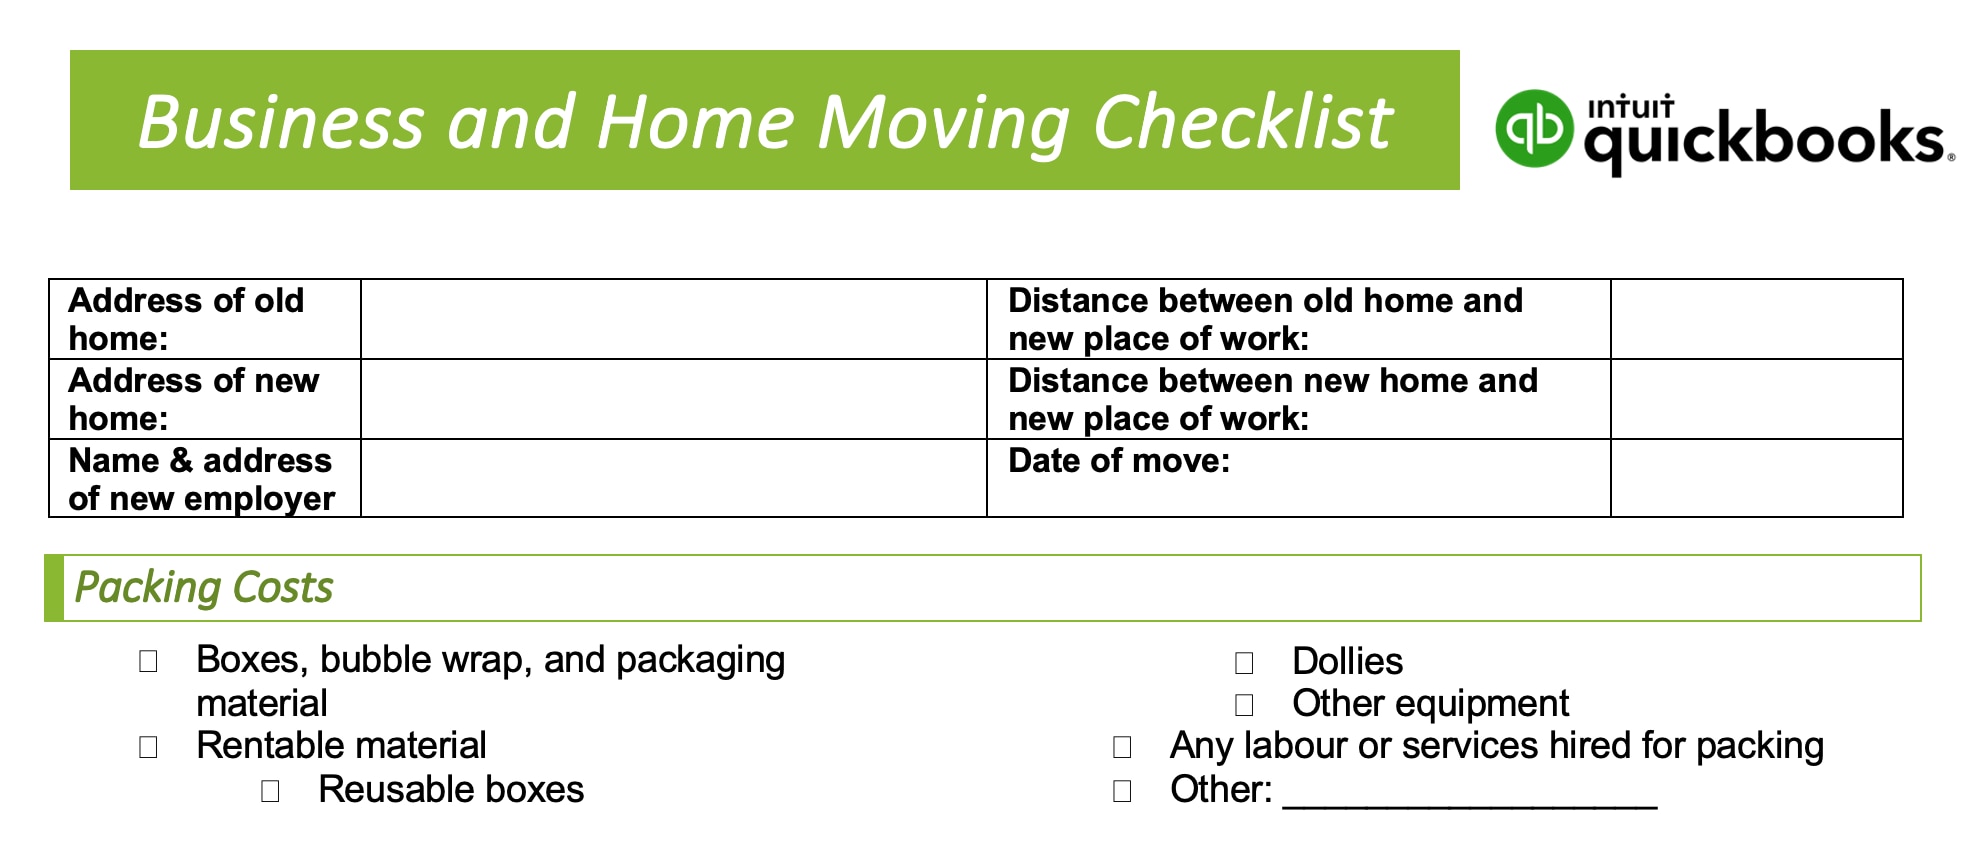 intuit quickbooks moving day checklist